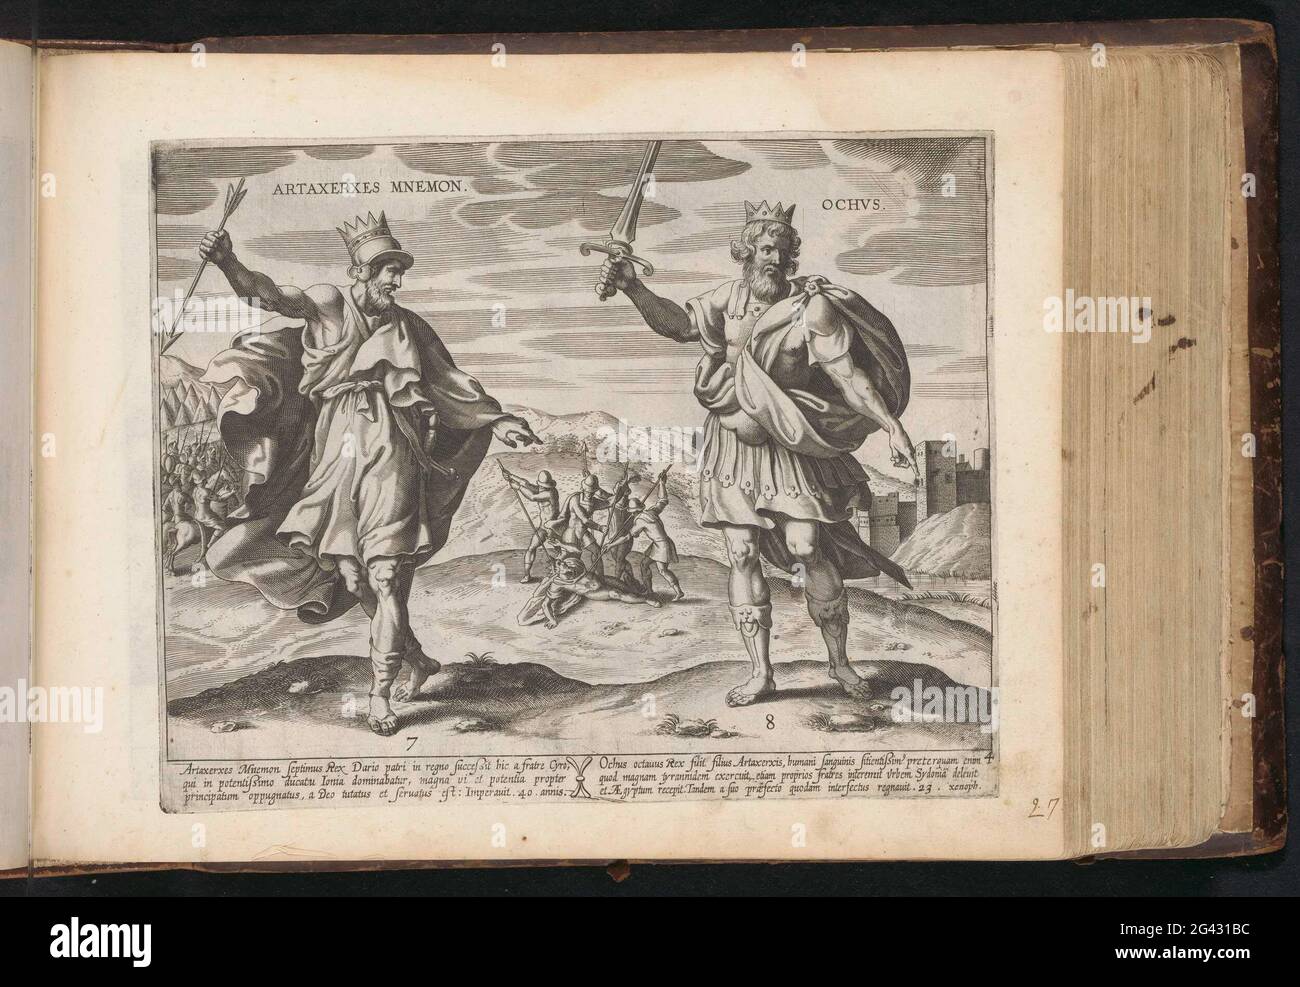 King Araxerxes II and King Artaxerxes III; Of the convene of presses; Persian kings; Den Grooten Figuer Bibel (...). Left King Artaxerxes II of Persia standing with an arrow in his hand. In the background you can see how artaxerxes beat his younger brother Cyrus that had rebelled against him. Right King Artaxerxes III of Persia standing with a sword in his hand. In the background is probably to see how his older brother is executed. Under the show explanatory texts in Latin. This print is part of an album. Stock Photo